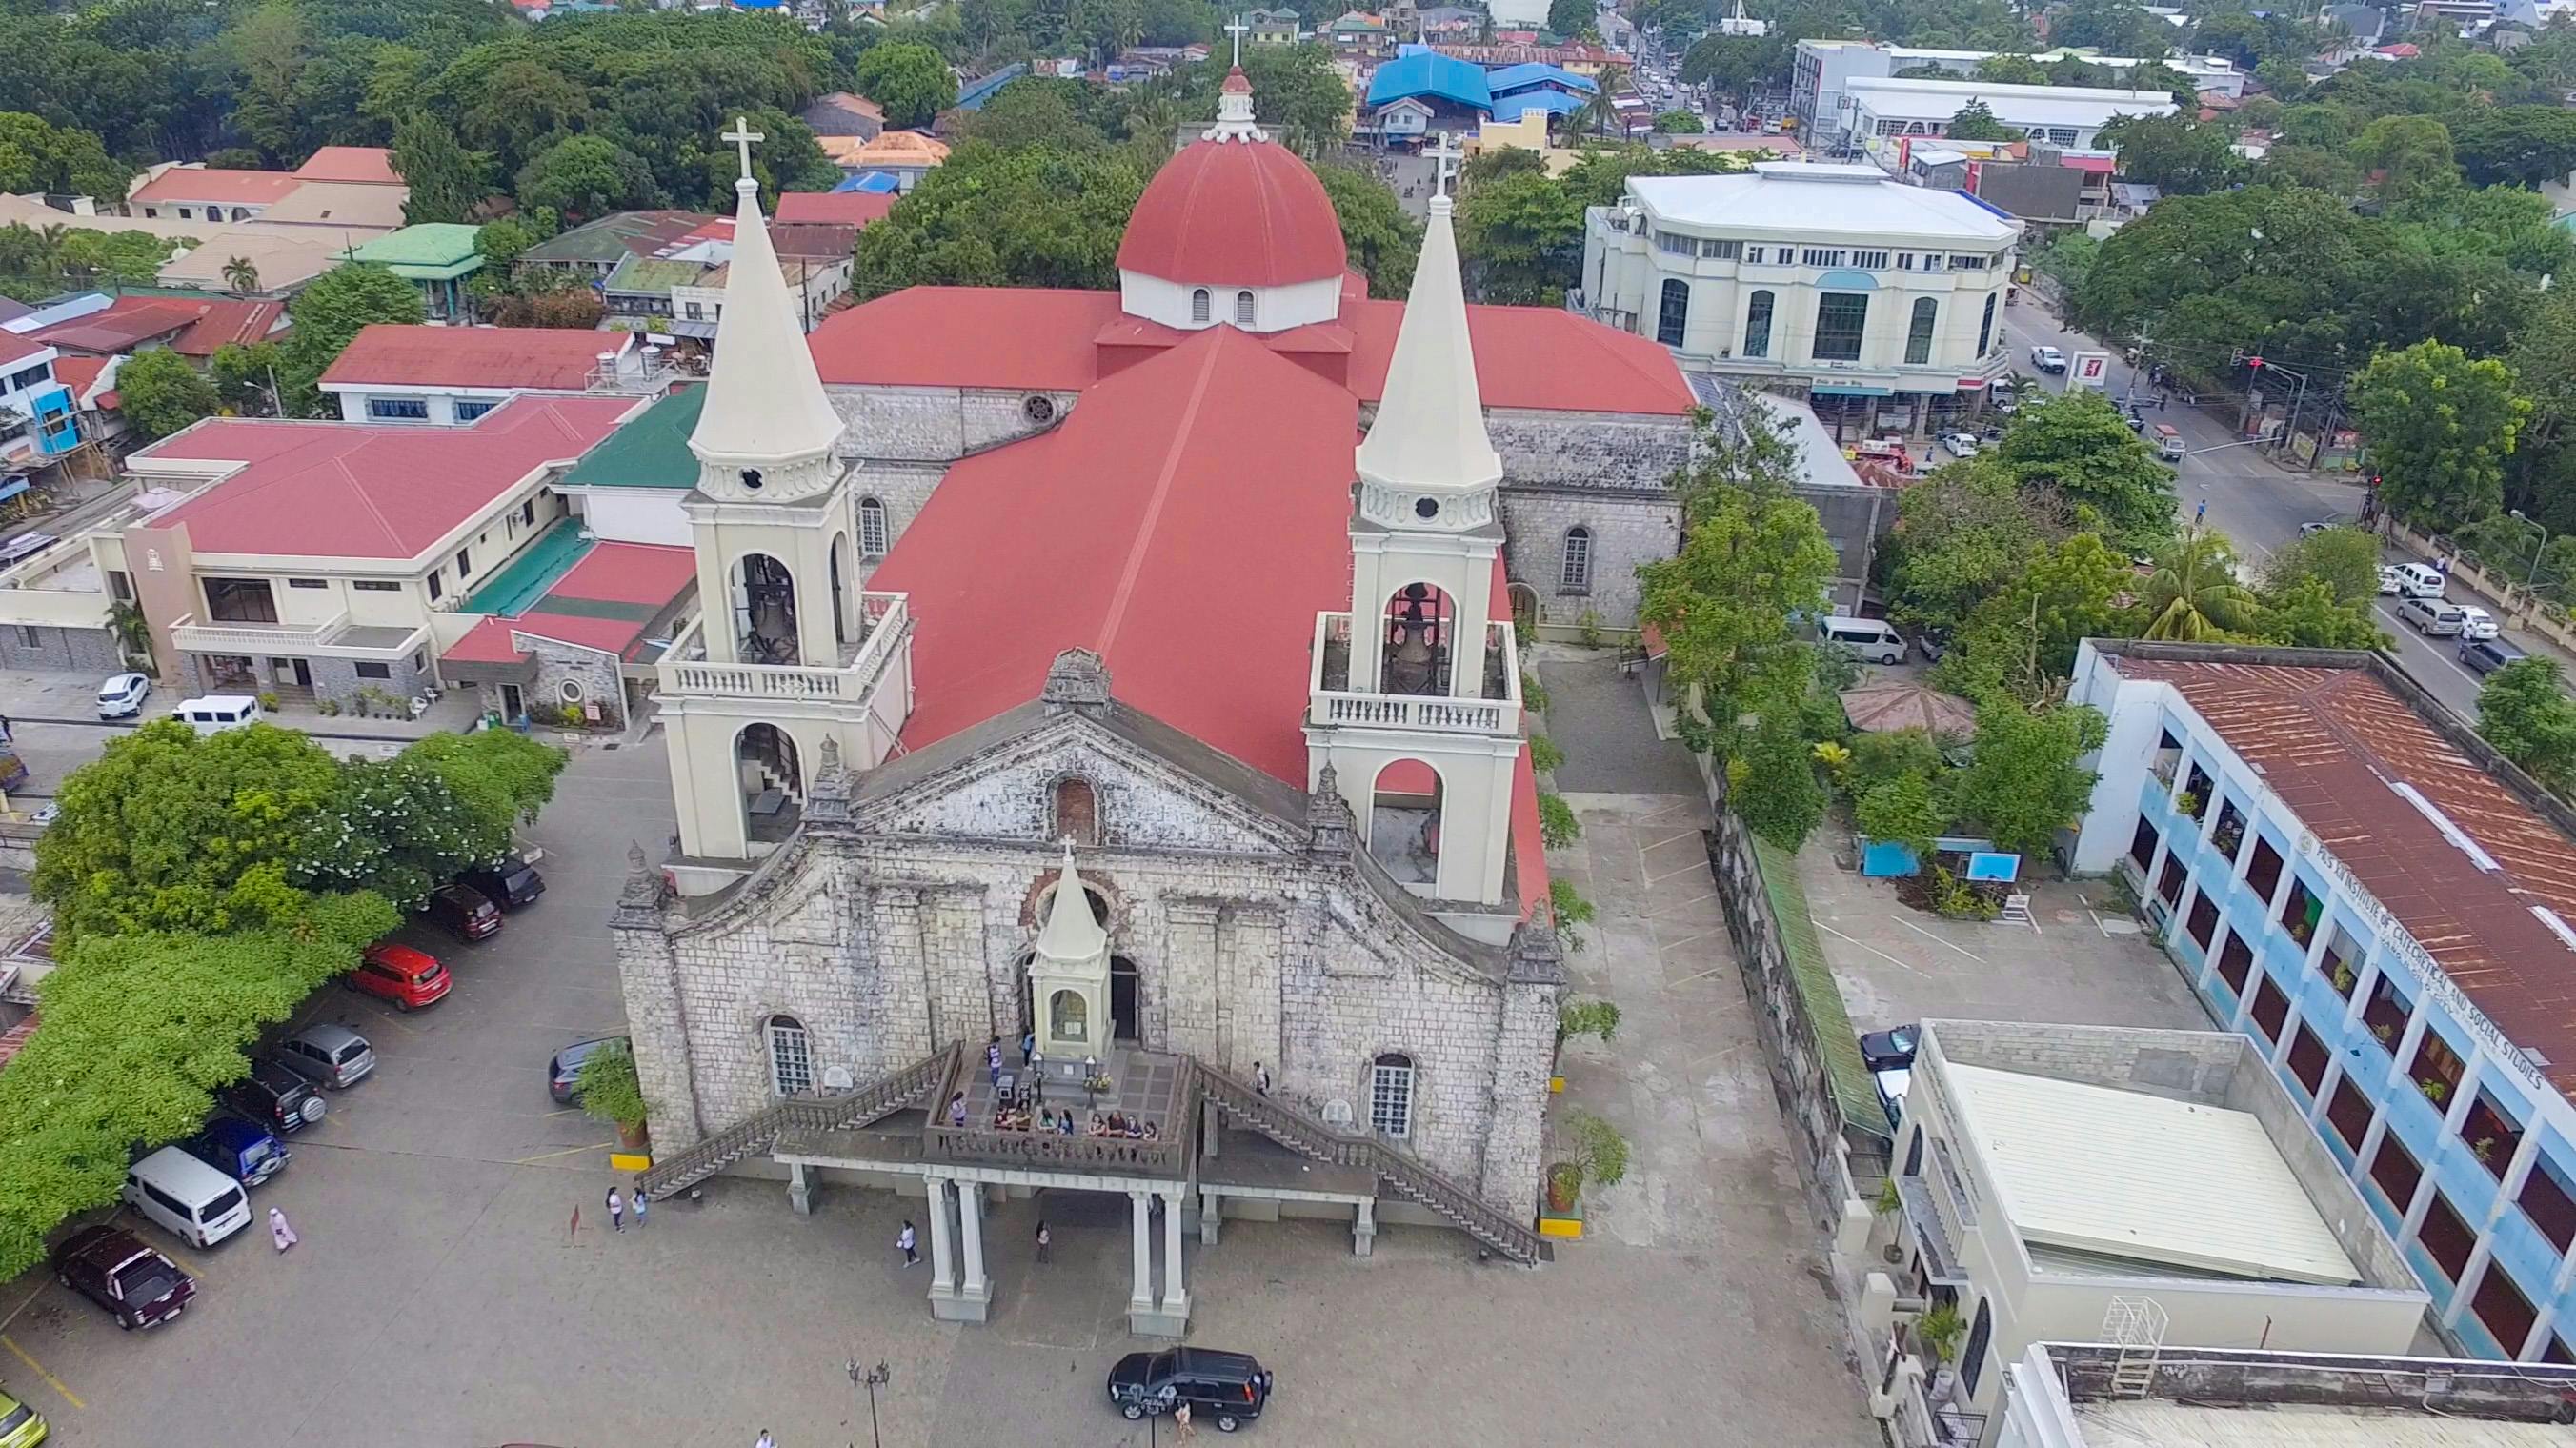 Iloilo City Heritage, Historic Churches & Garin Farm Tour with Lunch & Transfers - day 1